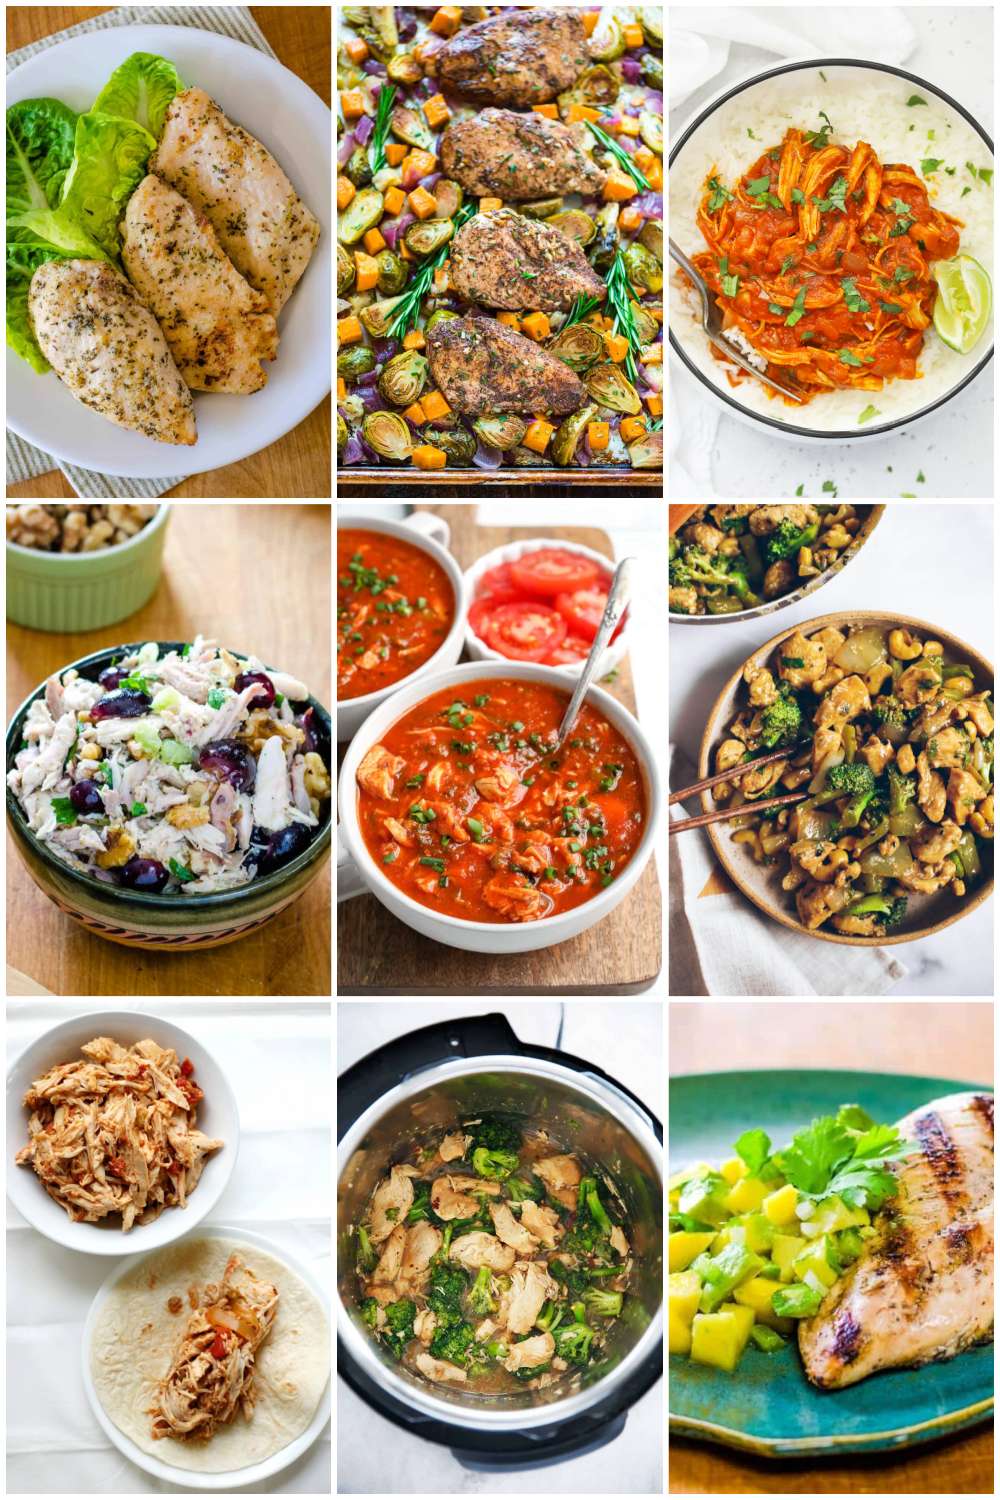 21 Boneless Chicken Breast Recipes For Easy Healthy Meals - Cook Eat Well